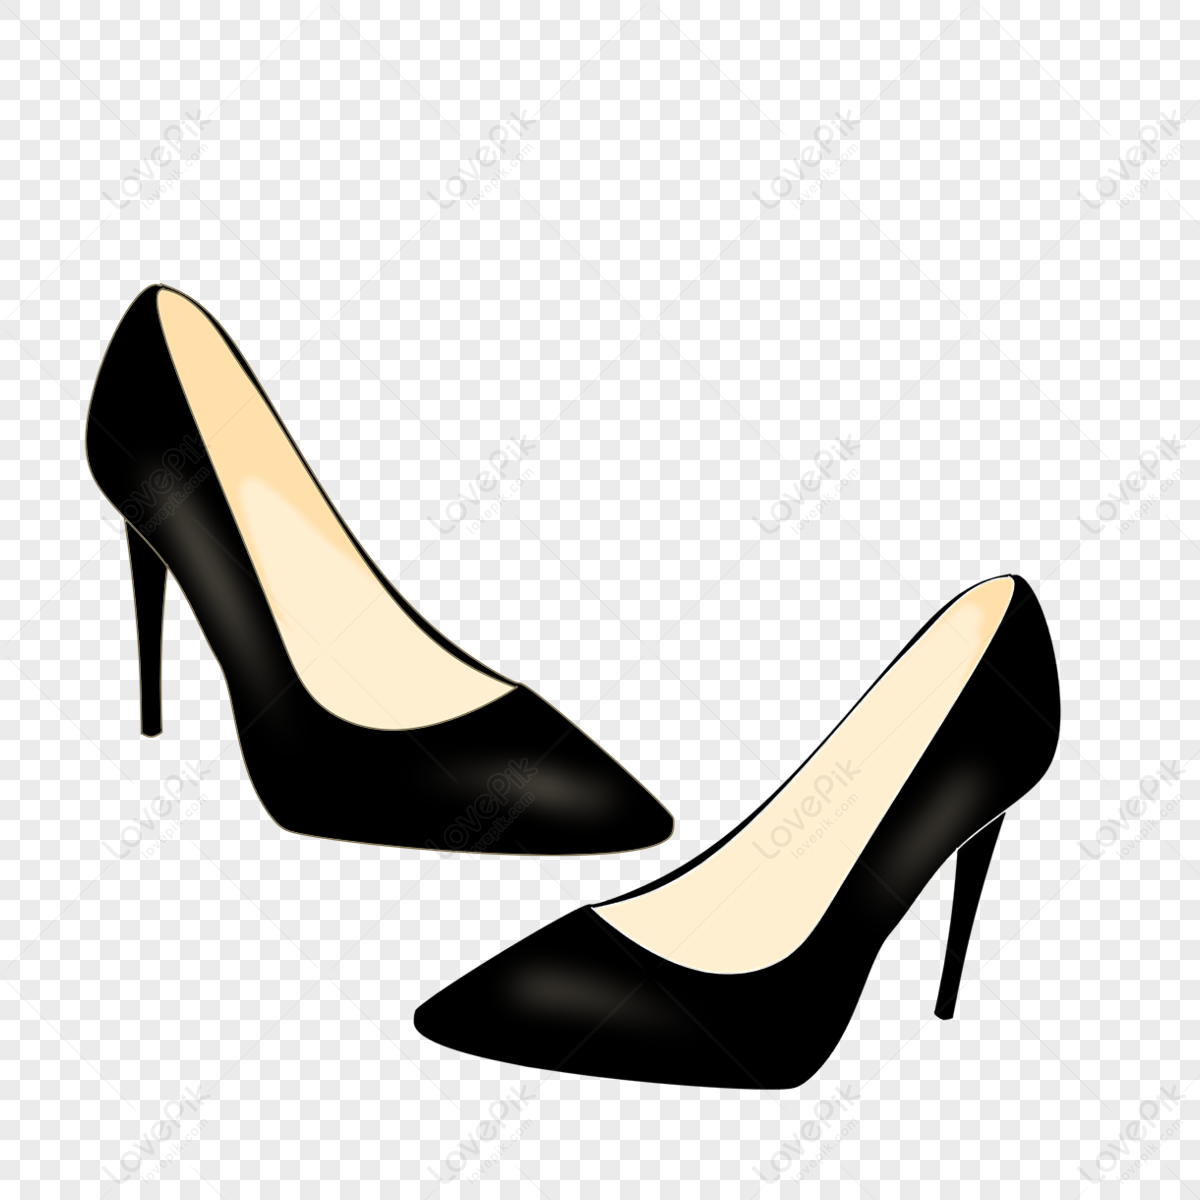 Black High Heels PNG Images With Transparent Background | Free Download ...